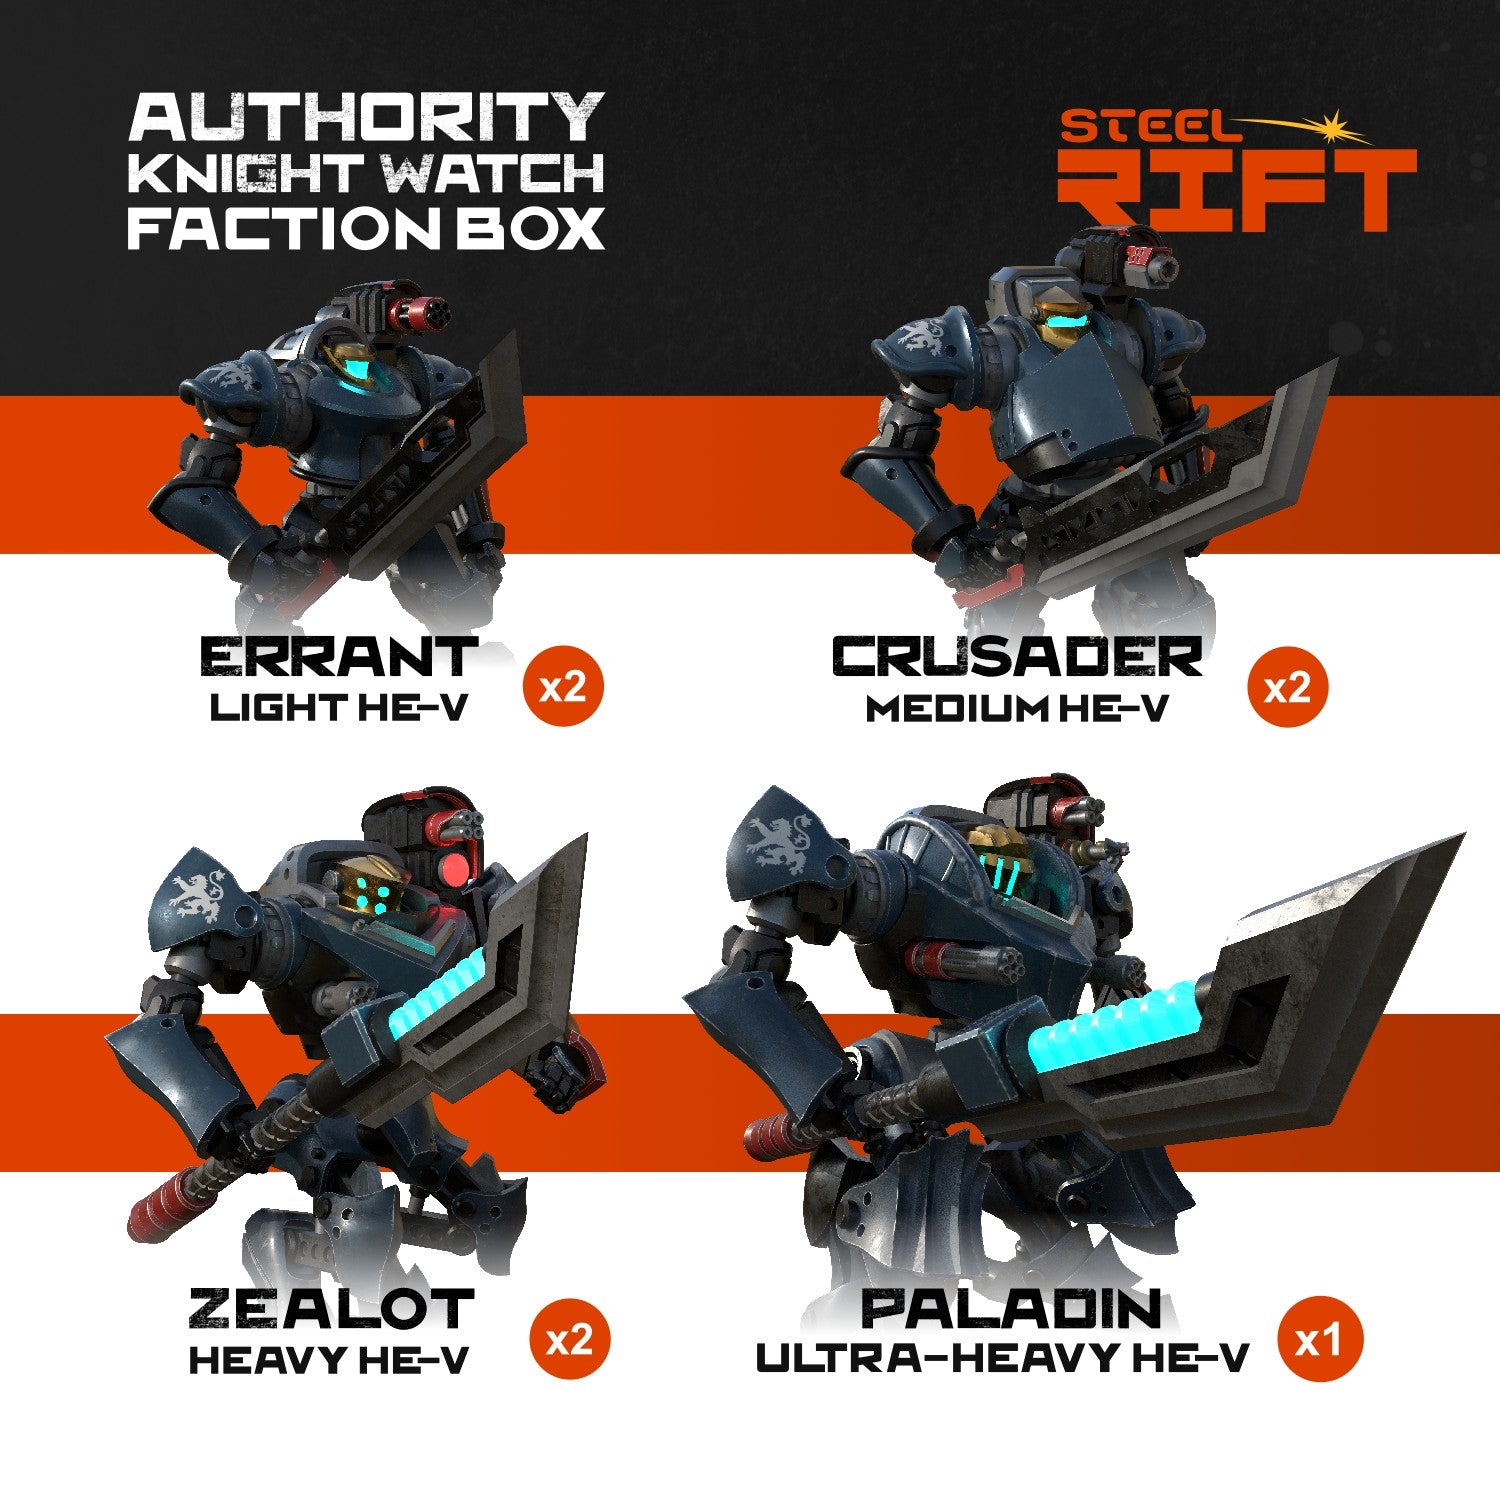 Authority Knight Watch Faction Box